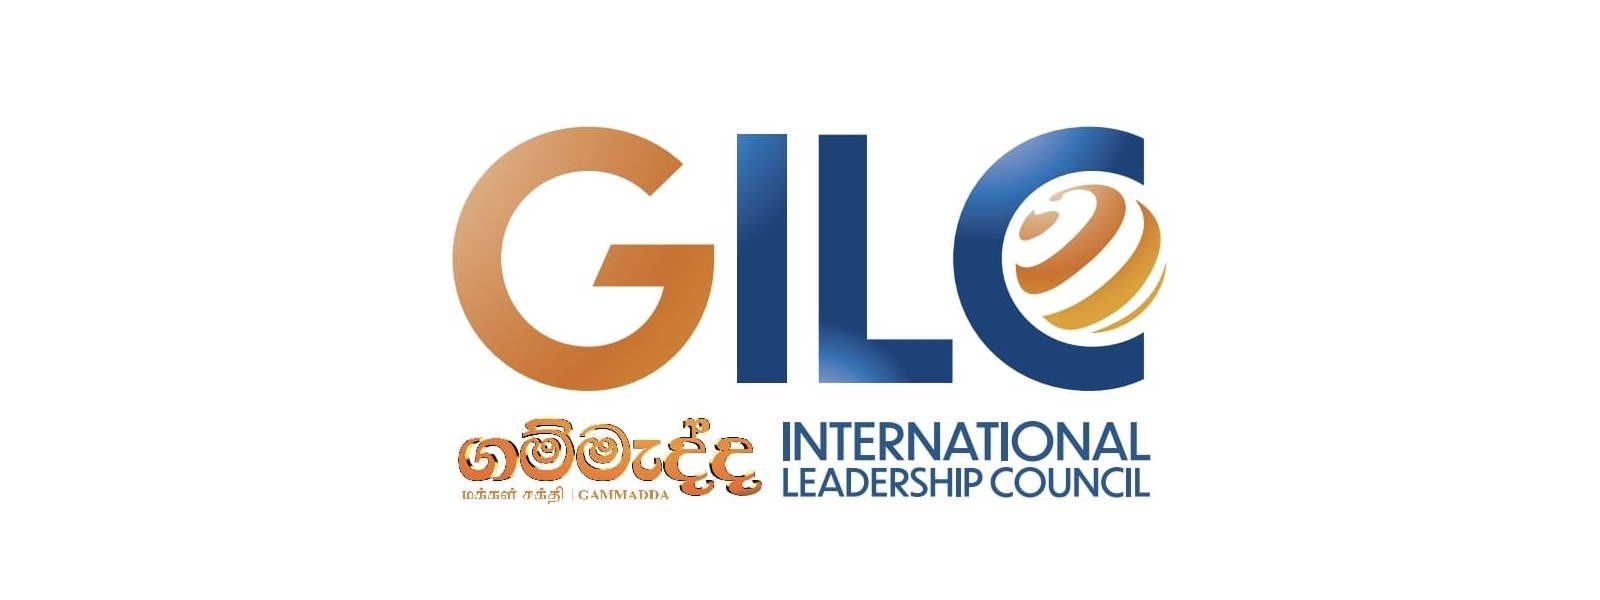 The Gammadda International Leadership Council (GILC) breaks new ground with online convocation